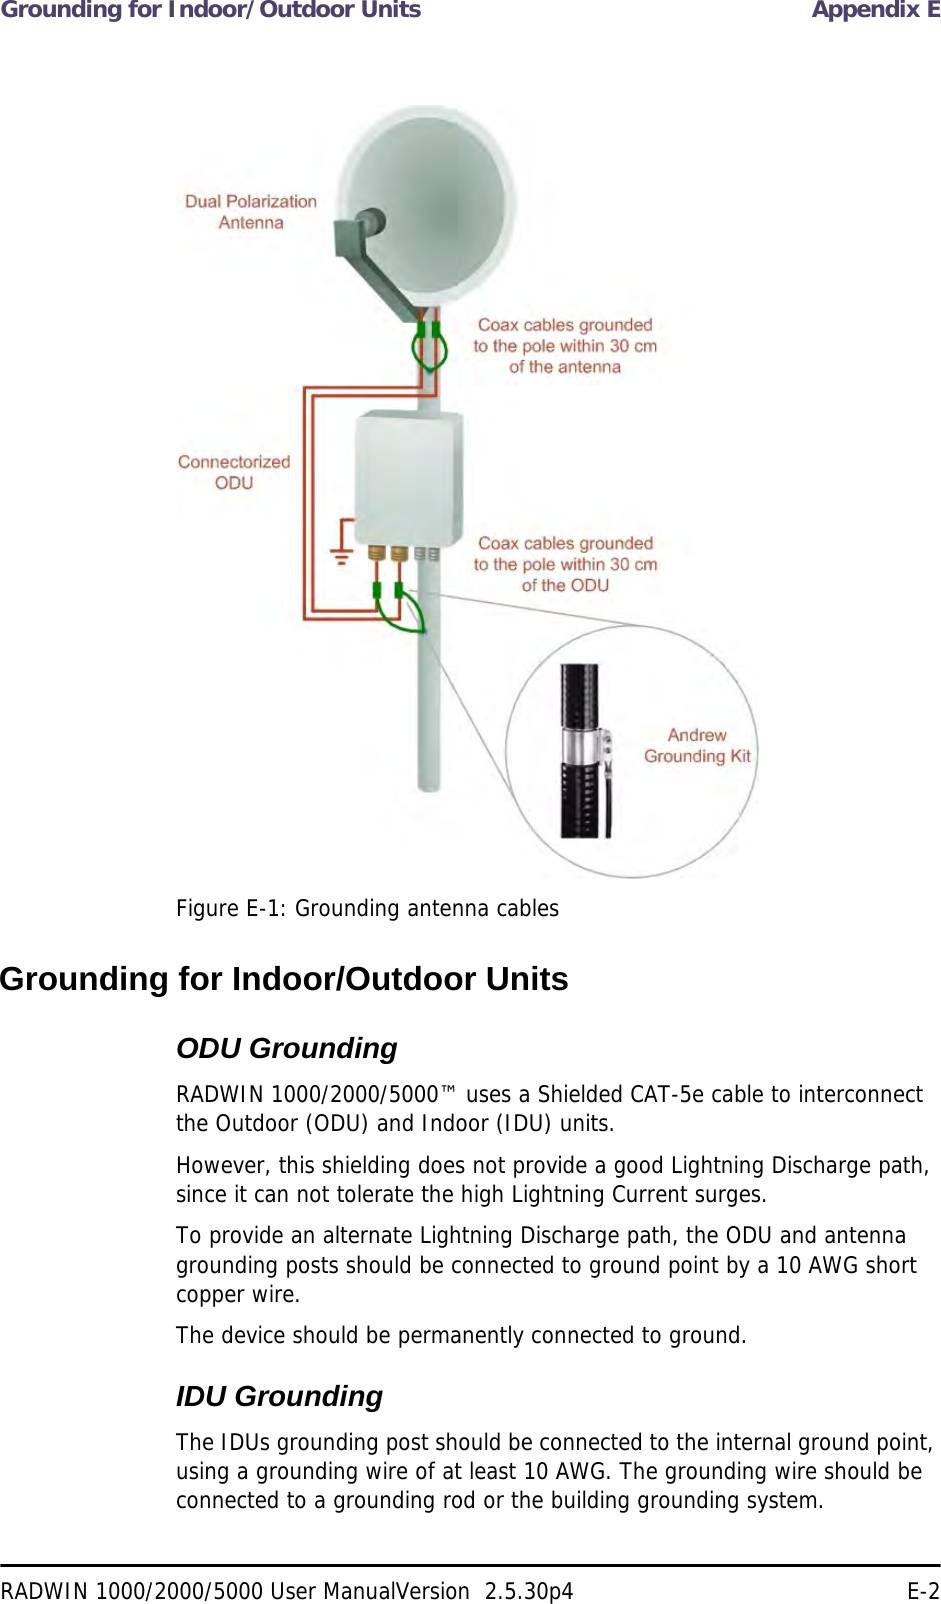 Grounding for Indoor/Outdoor Units Appendix ERADWIN 1000/2000/5000 User ManualVersion  2.5.30p4 E-2Figure E-1: Grounding antenna cablesGrounding for Indoor/Outdoor UnitsODU GroundingRADWIN 1000/2000/5000™ uses a Shielded CAT-5e cable to interconnect the Outdoor (ODU) and Indoor (IDU) units. However, this shielding does not provide a good Lightning Discharge path, since it can not tolerate the high Lightning Current surges.To provide an alternate Lightning Discharge path, the ODU and antenna grounding posts should be connected to ground point by a 10 AWG short copper wire.The device should be permanently connected to ground.IDU GroundingThe IDUs grounding post should be connected to the internal ground point, using a grounding wire of at least 10 AWG. The grounding wire should be connected to a grounding rod or the building grounding system.